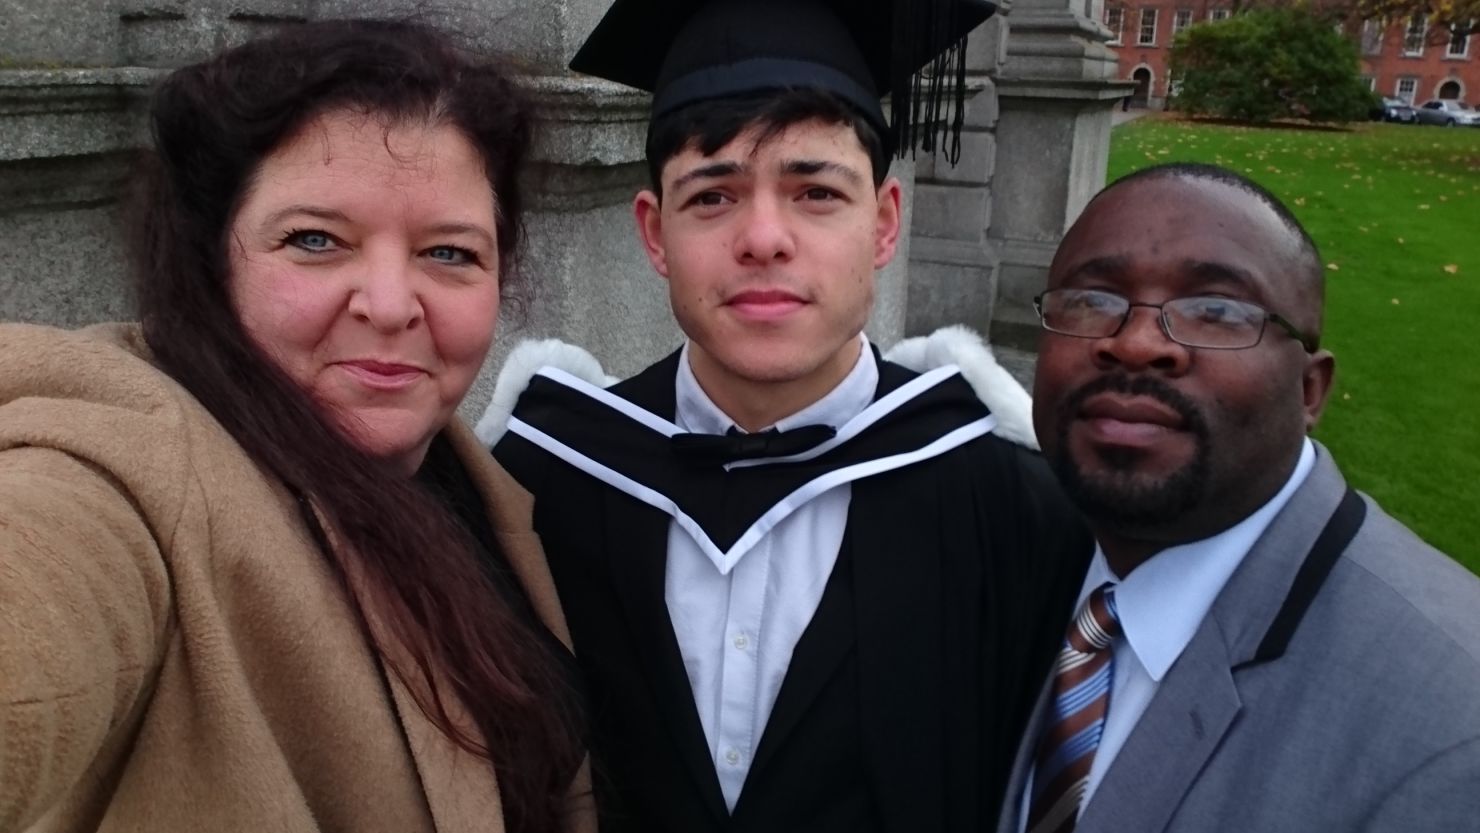 From left to right, Fanny Binder, Sean Binder and his stepfather, Desire, at Sean's graduation ceremony.